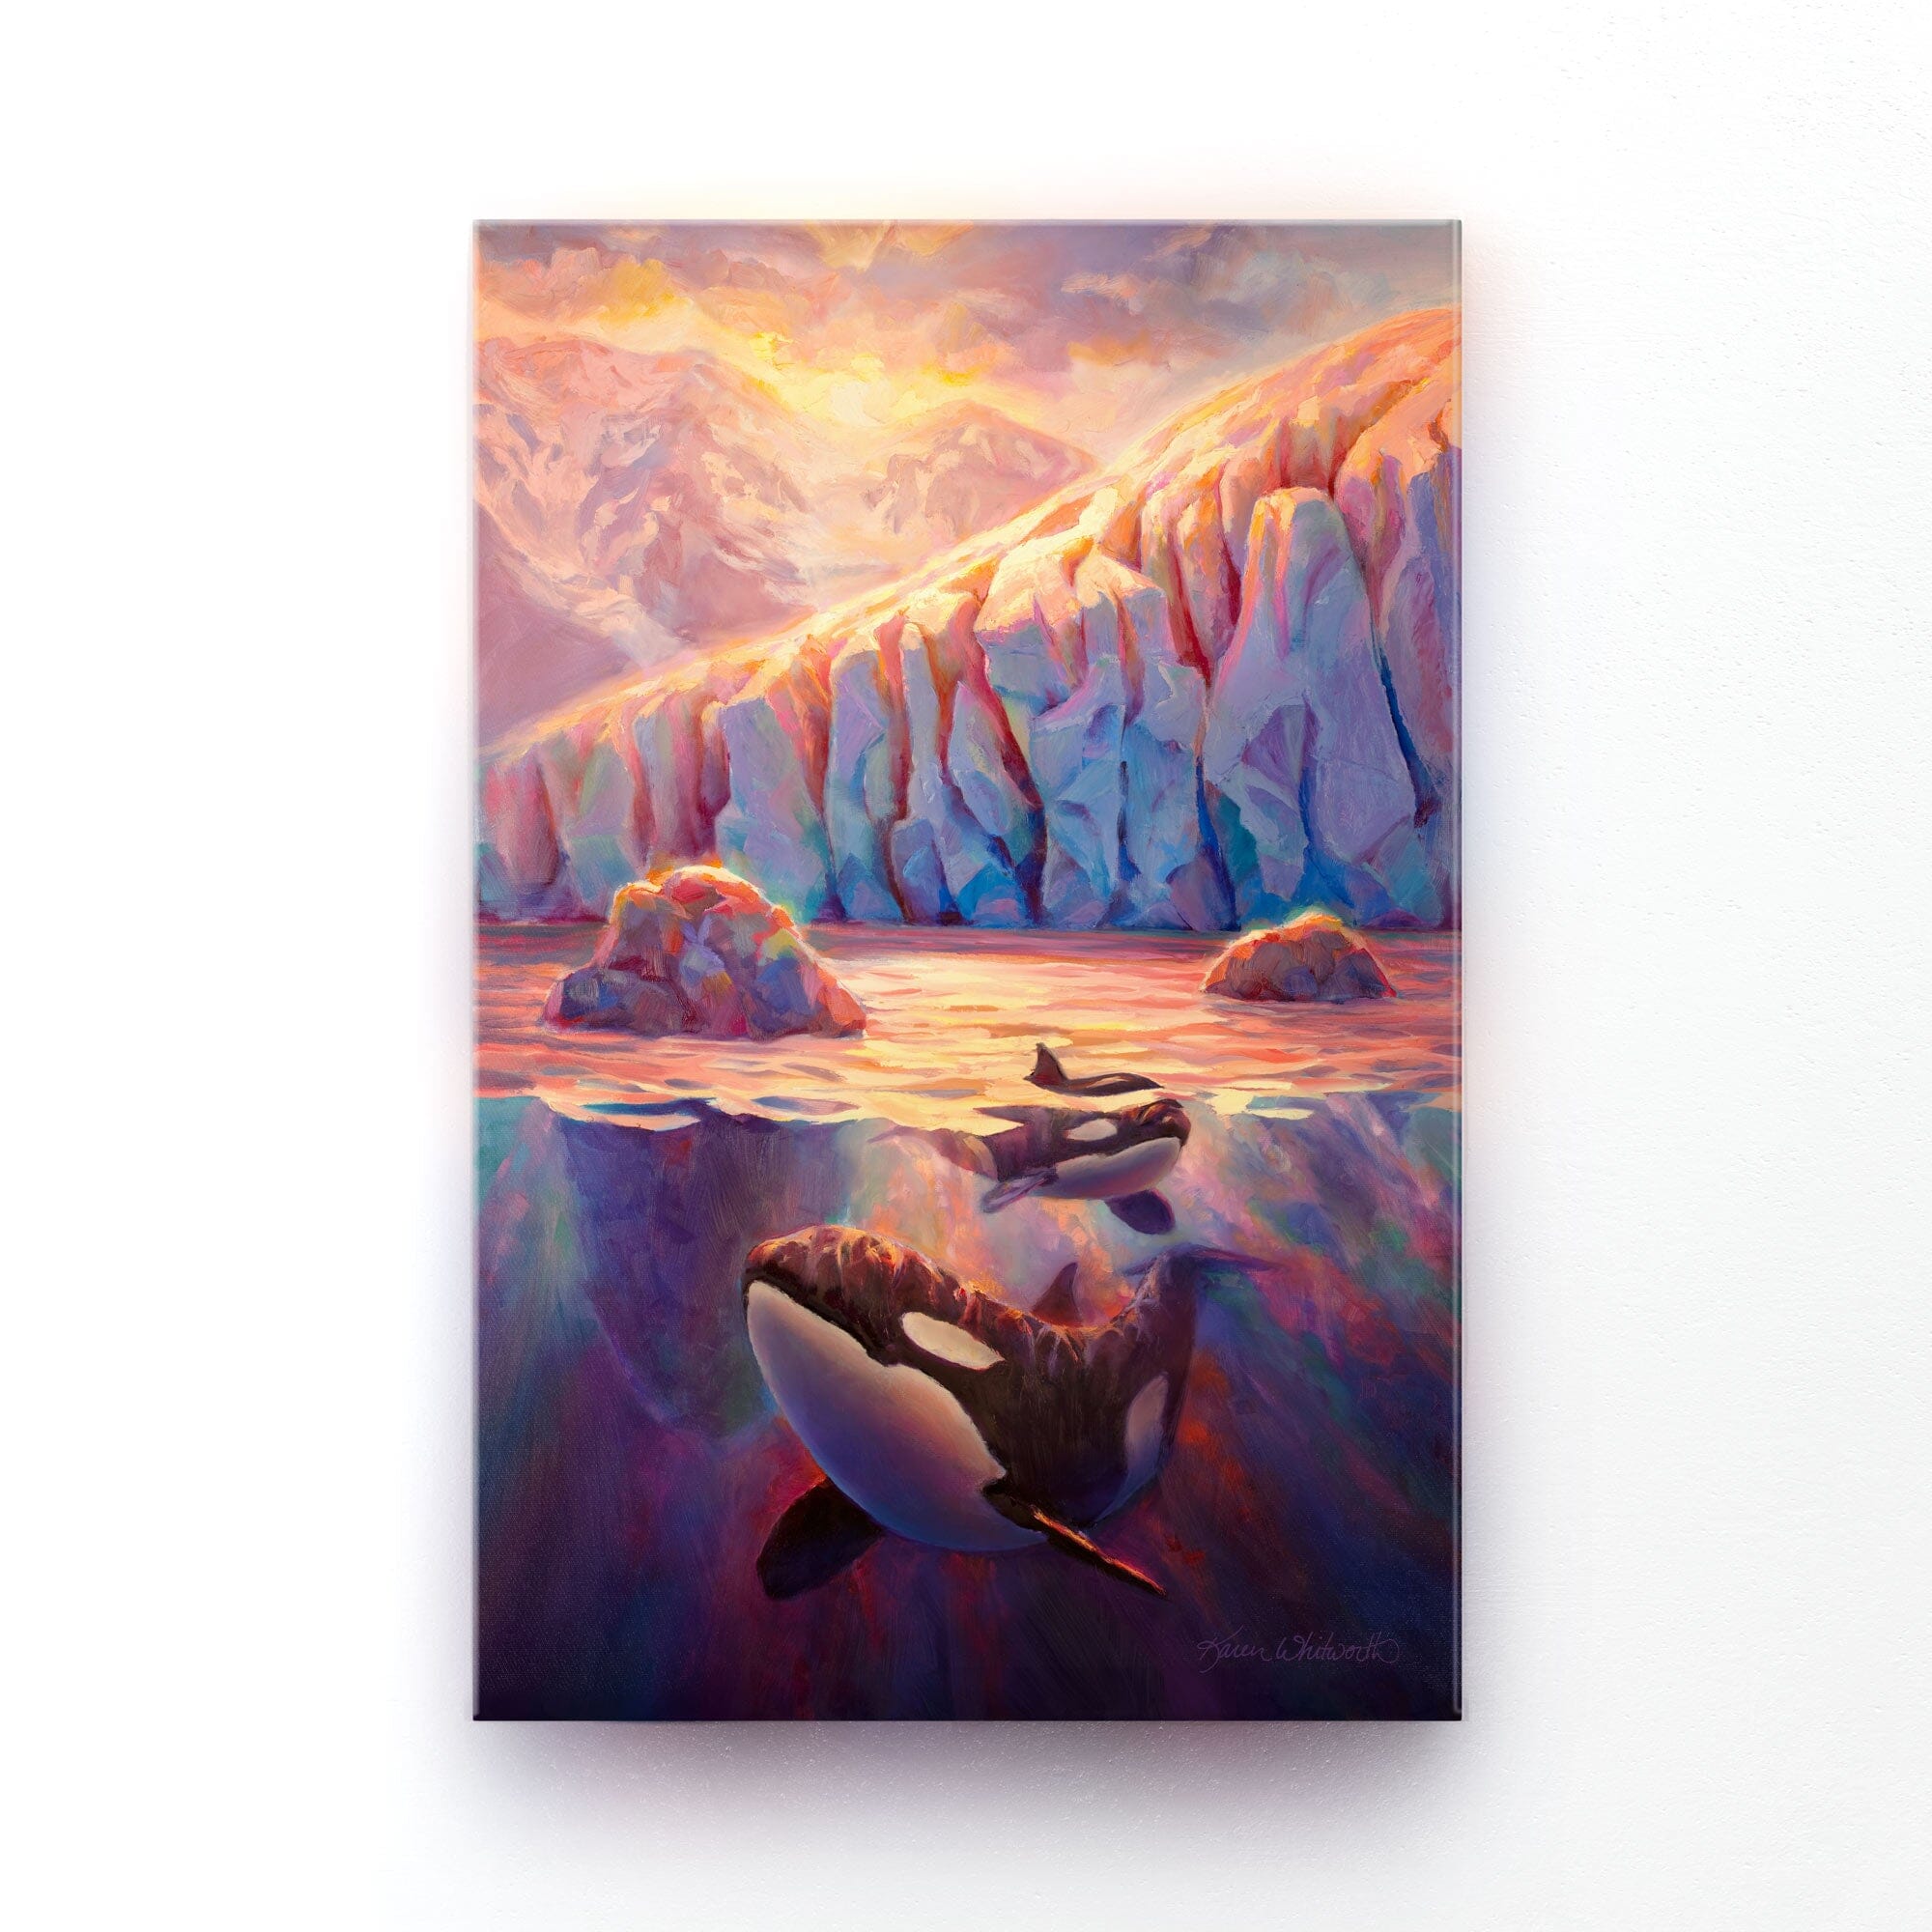 Wall art painting of a glacier sunrise with orca whales by Alaska artist Karen Whitworth. The painting is shown as a canvas print hanging on a white wall.